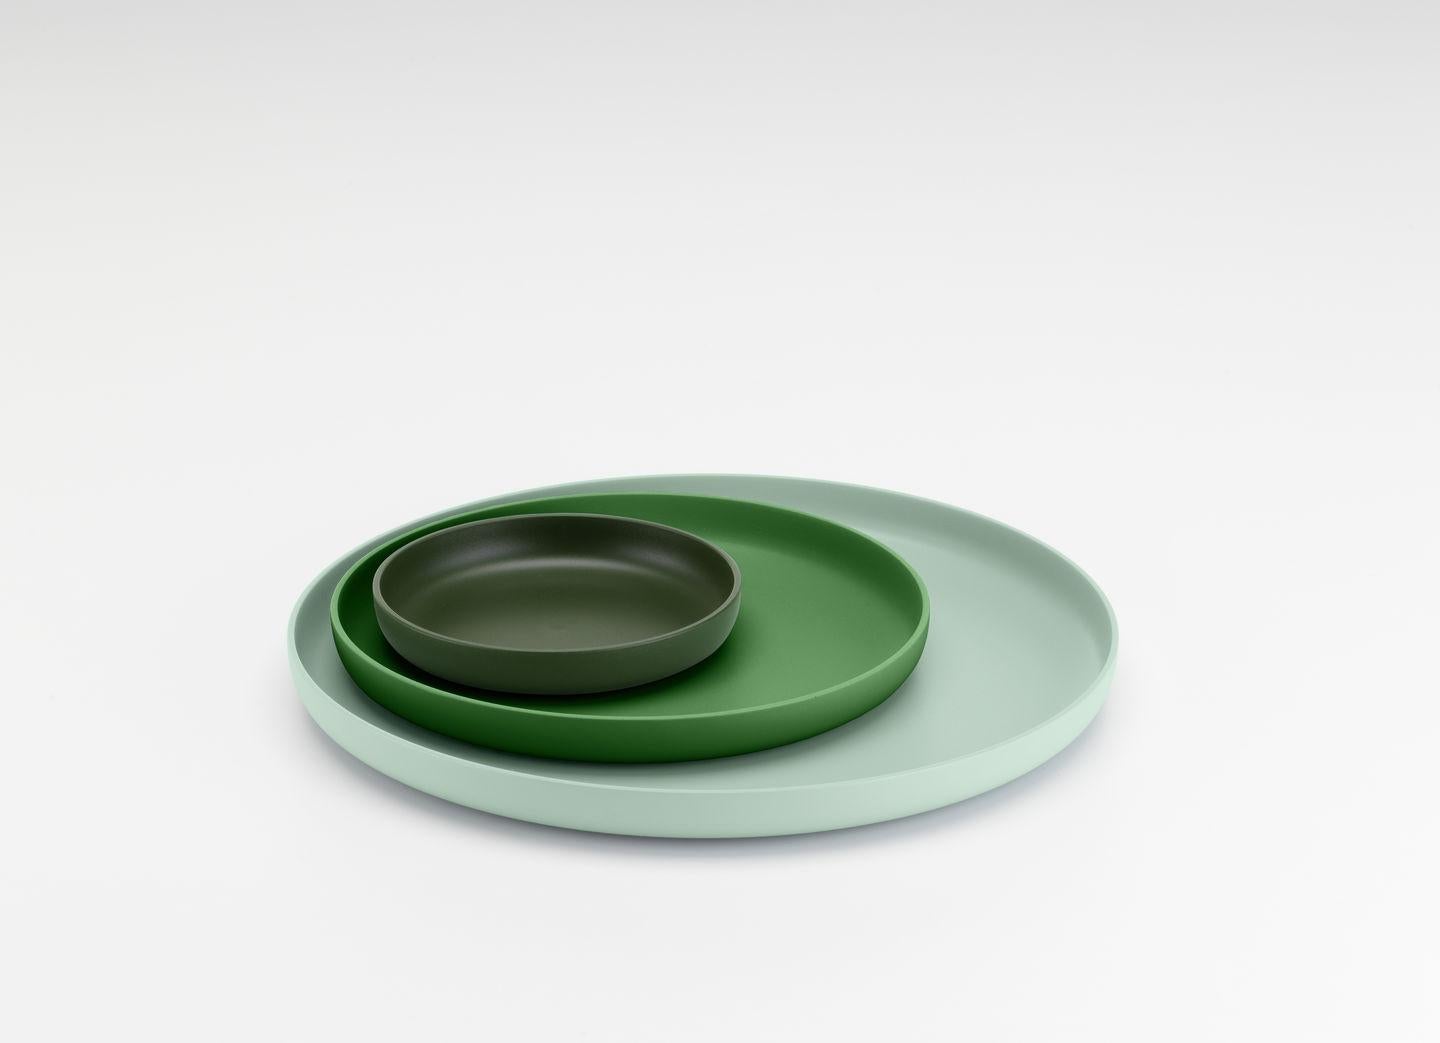 Trays designed by Jasper Morrison in 2018.
Manufactured by Vitra, Switzerland.

The Trays are flat dishes made of plastic, developed as a set of three in carefully harmonised colours and sizes by Jasper Morrison in line with his 'super normal'